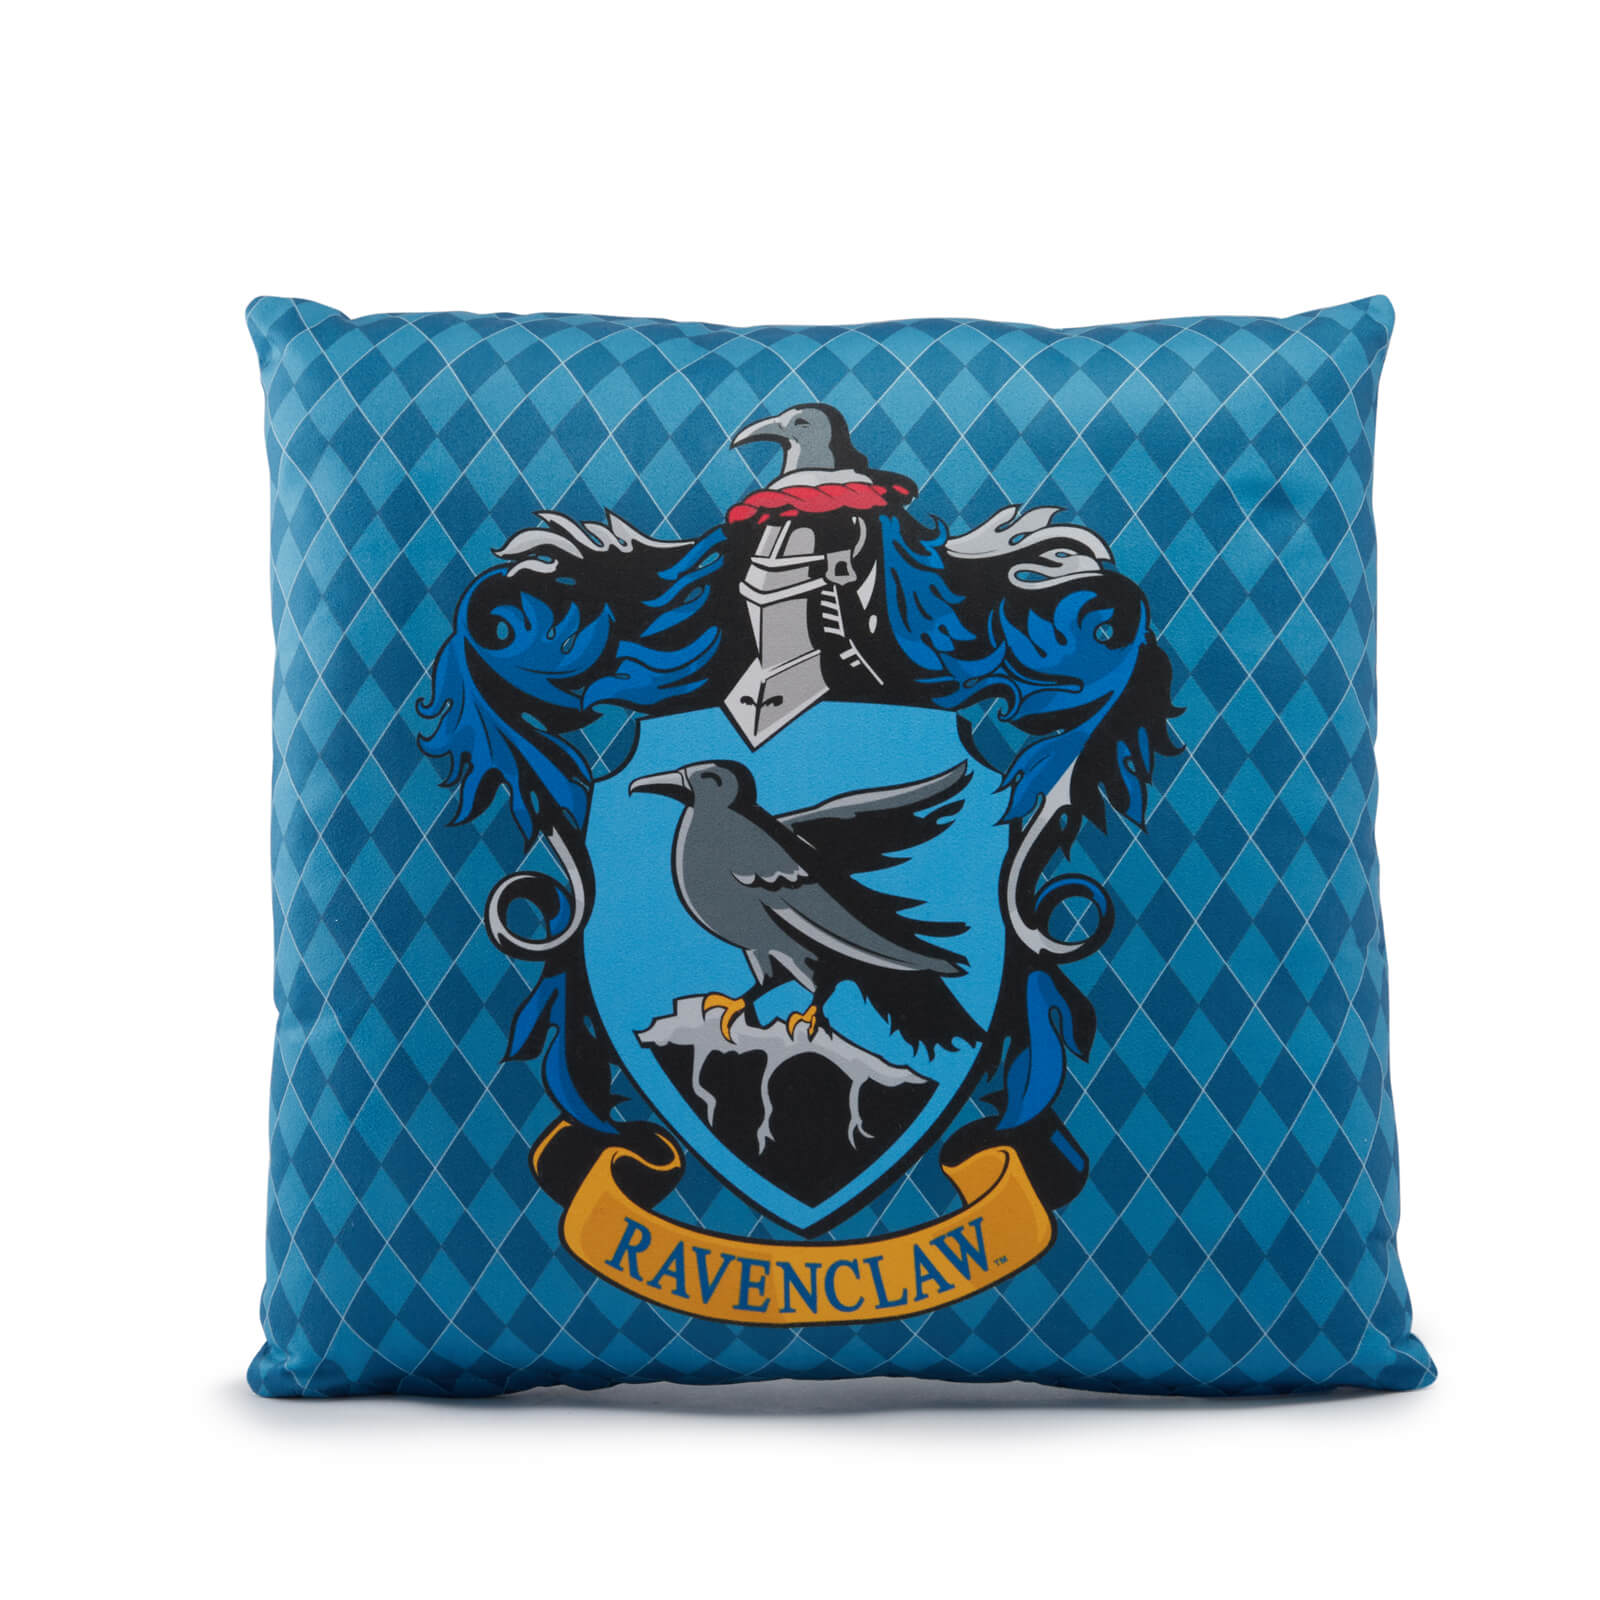 Harry Potter Ravenclaw Square Cushion - 60x60cm - Soft Touch